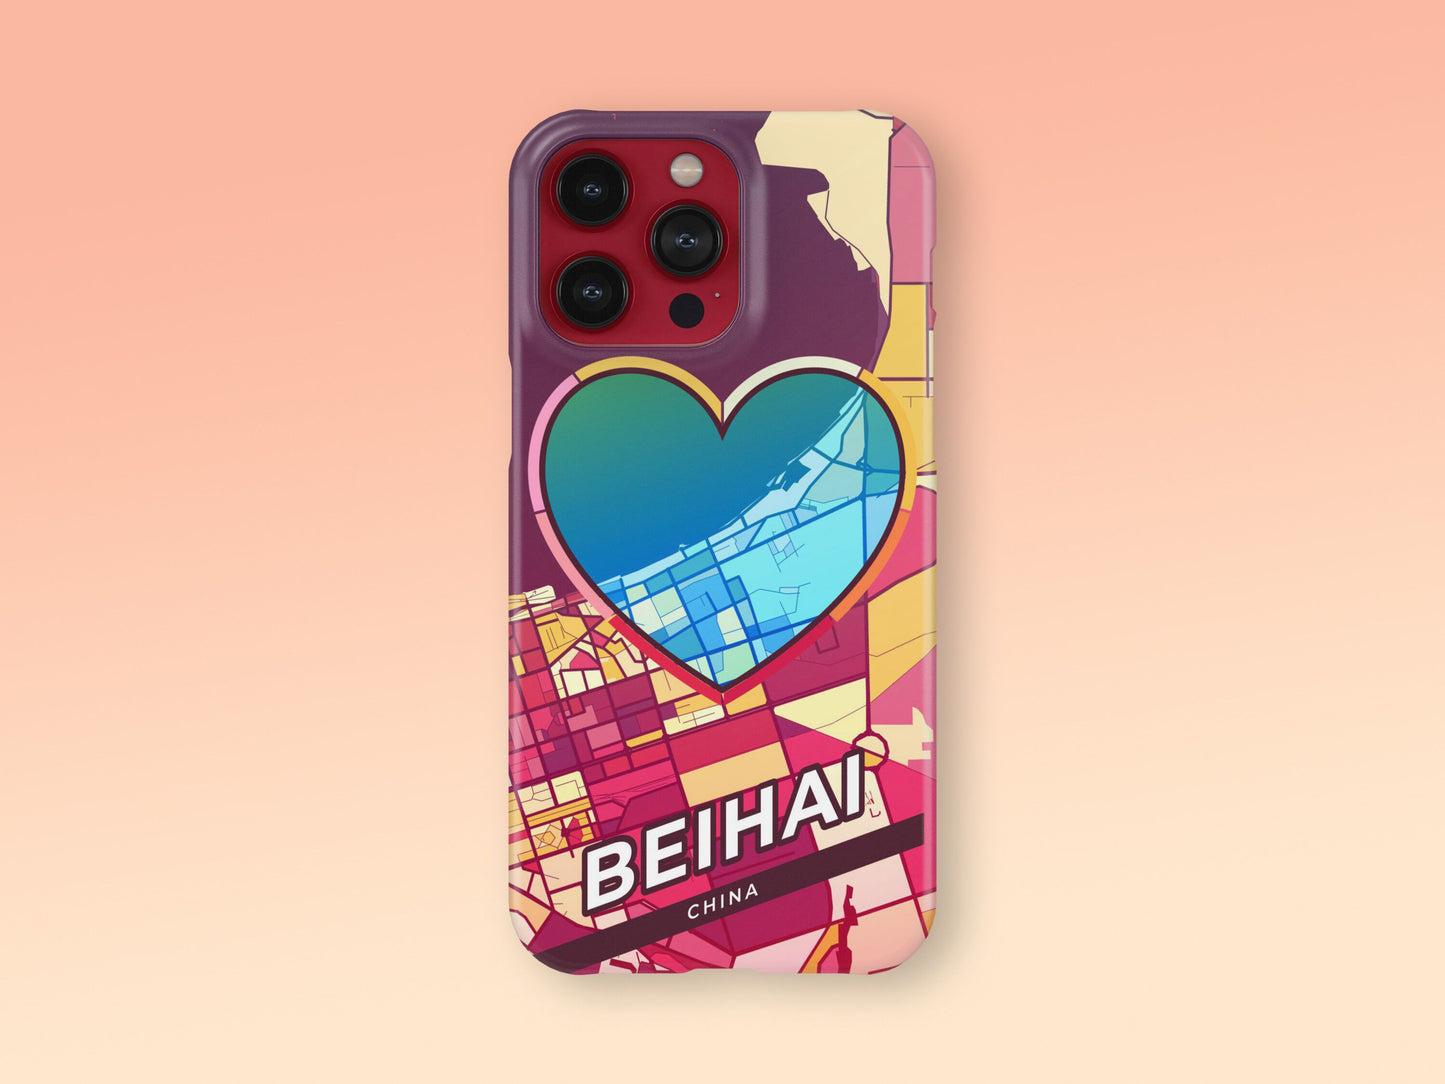 Beihai China slim phone case with colorful icon. Birthday, wedding or housewarming gift. Couple match cases. 2